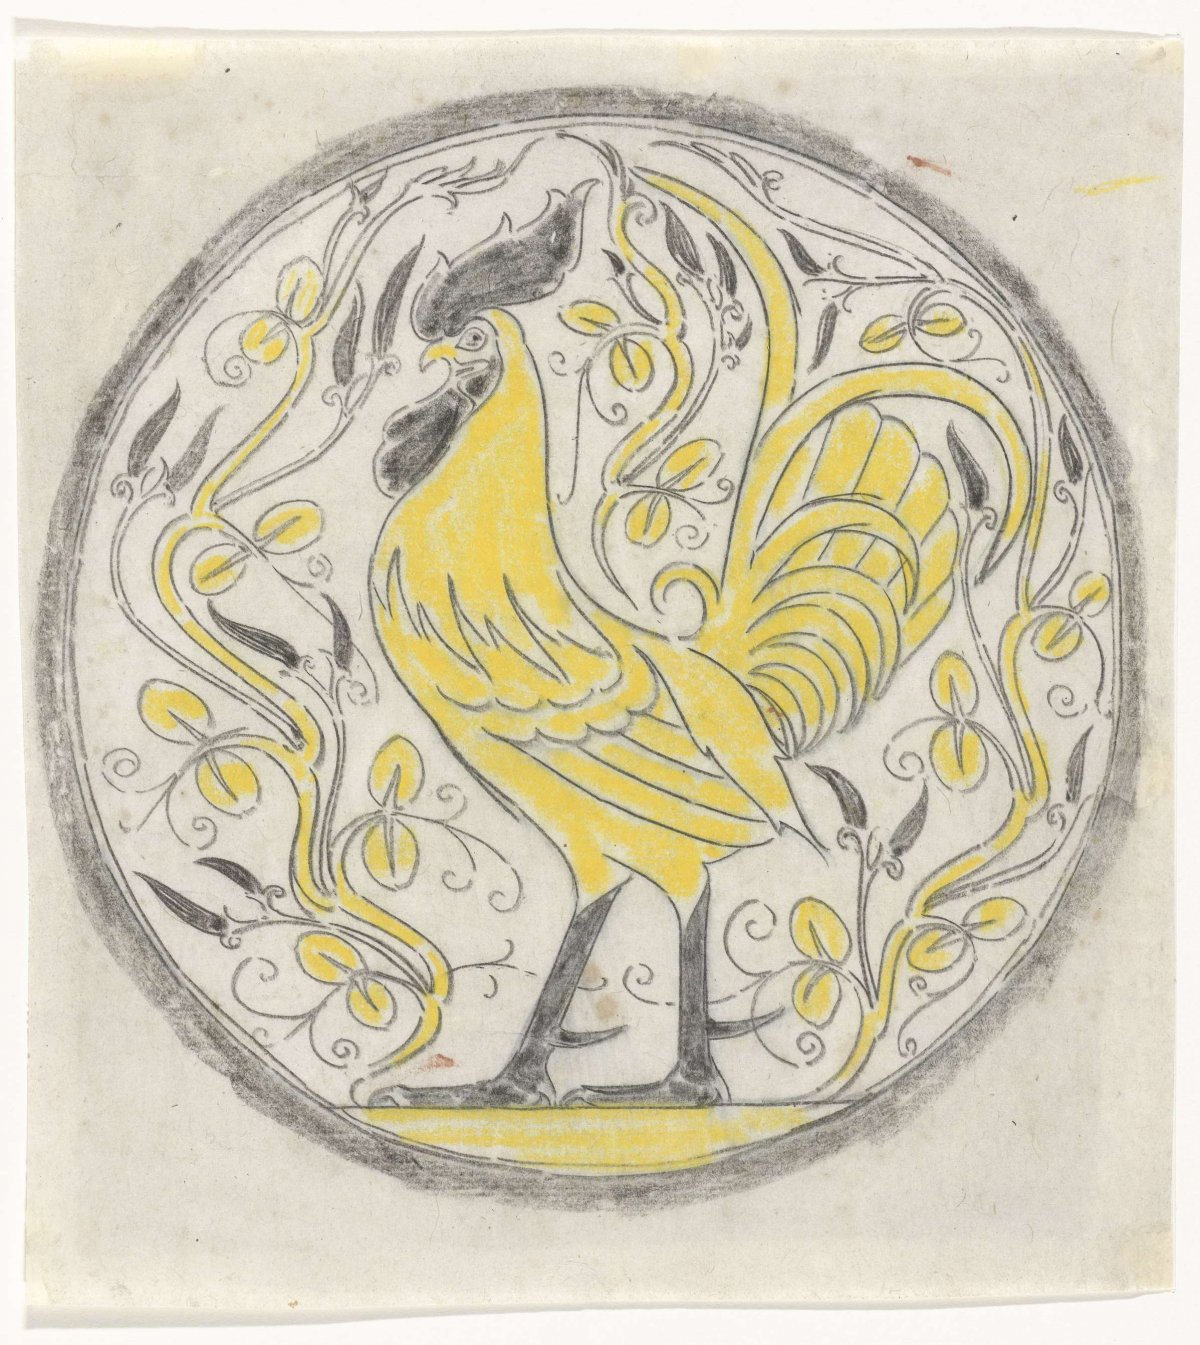 Decorative design with a rooster in a circle, Gerrit Willem Dijsselhof, 1876 - 1924